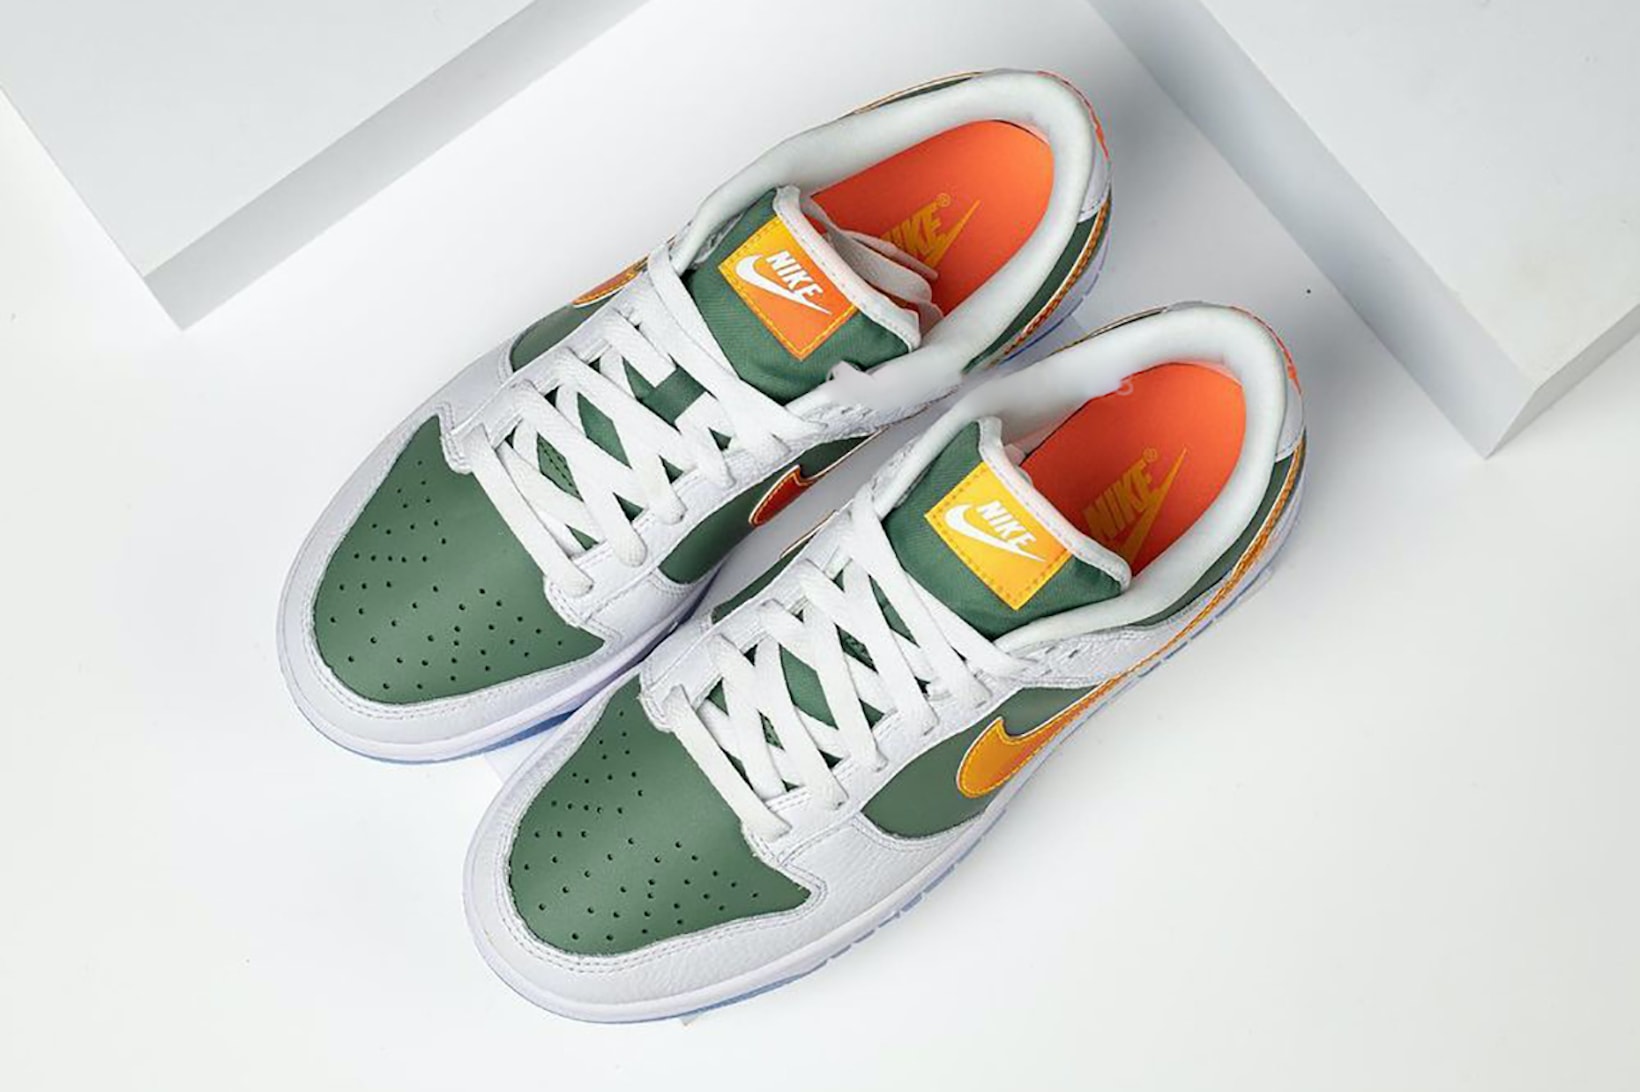 nike dunk low sneakers ny vs ny new york city green white orange footwear kicks shoes sneakerhead aerial top view insole